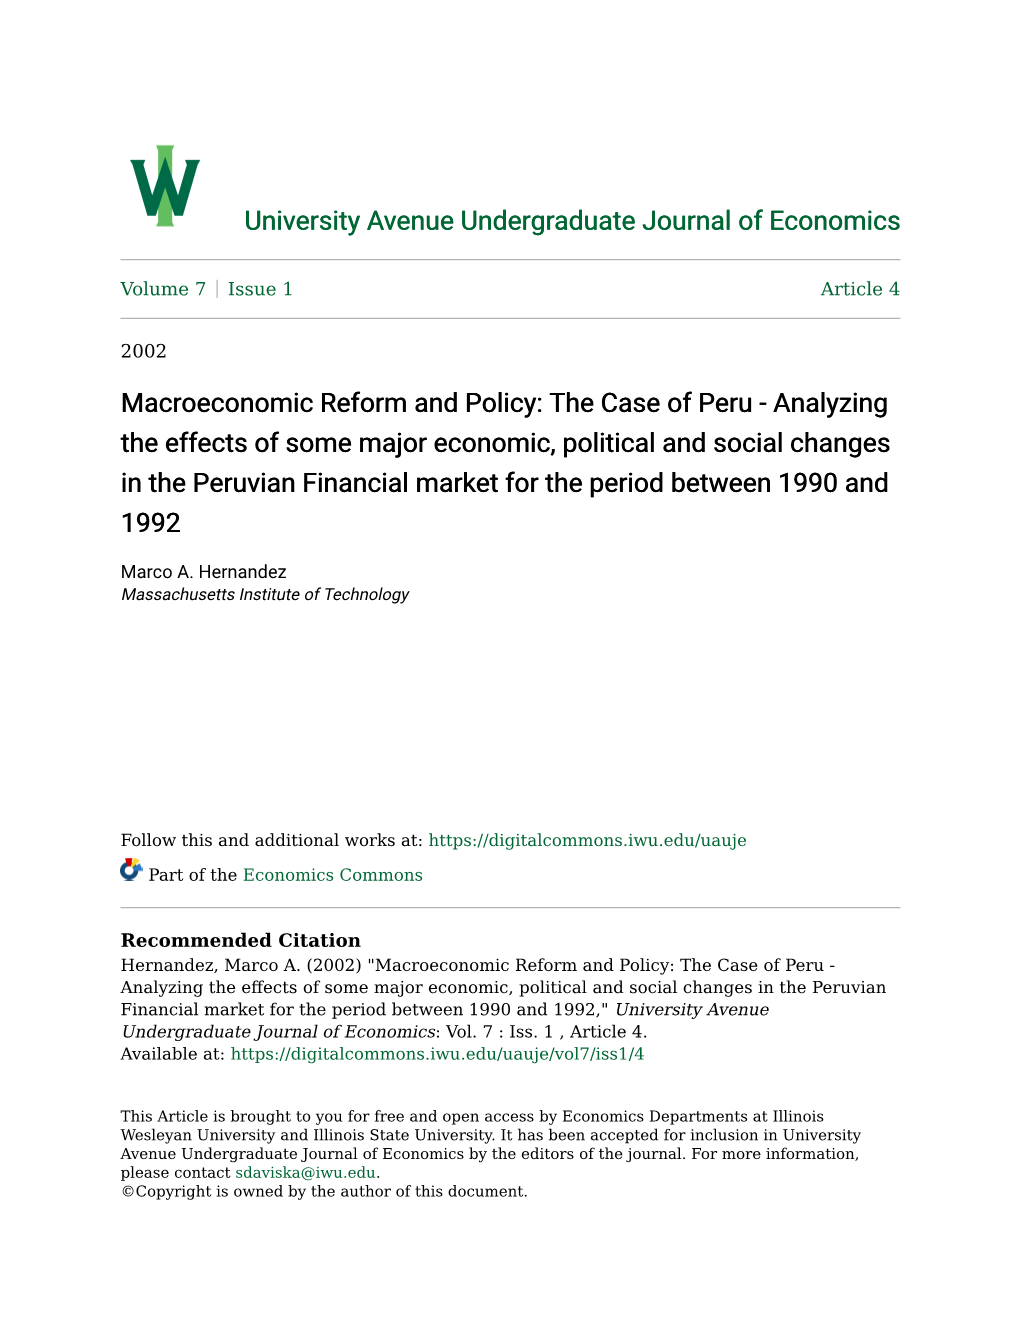 Macroeconomic Reform and Policy: the Case of Peru